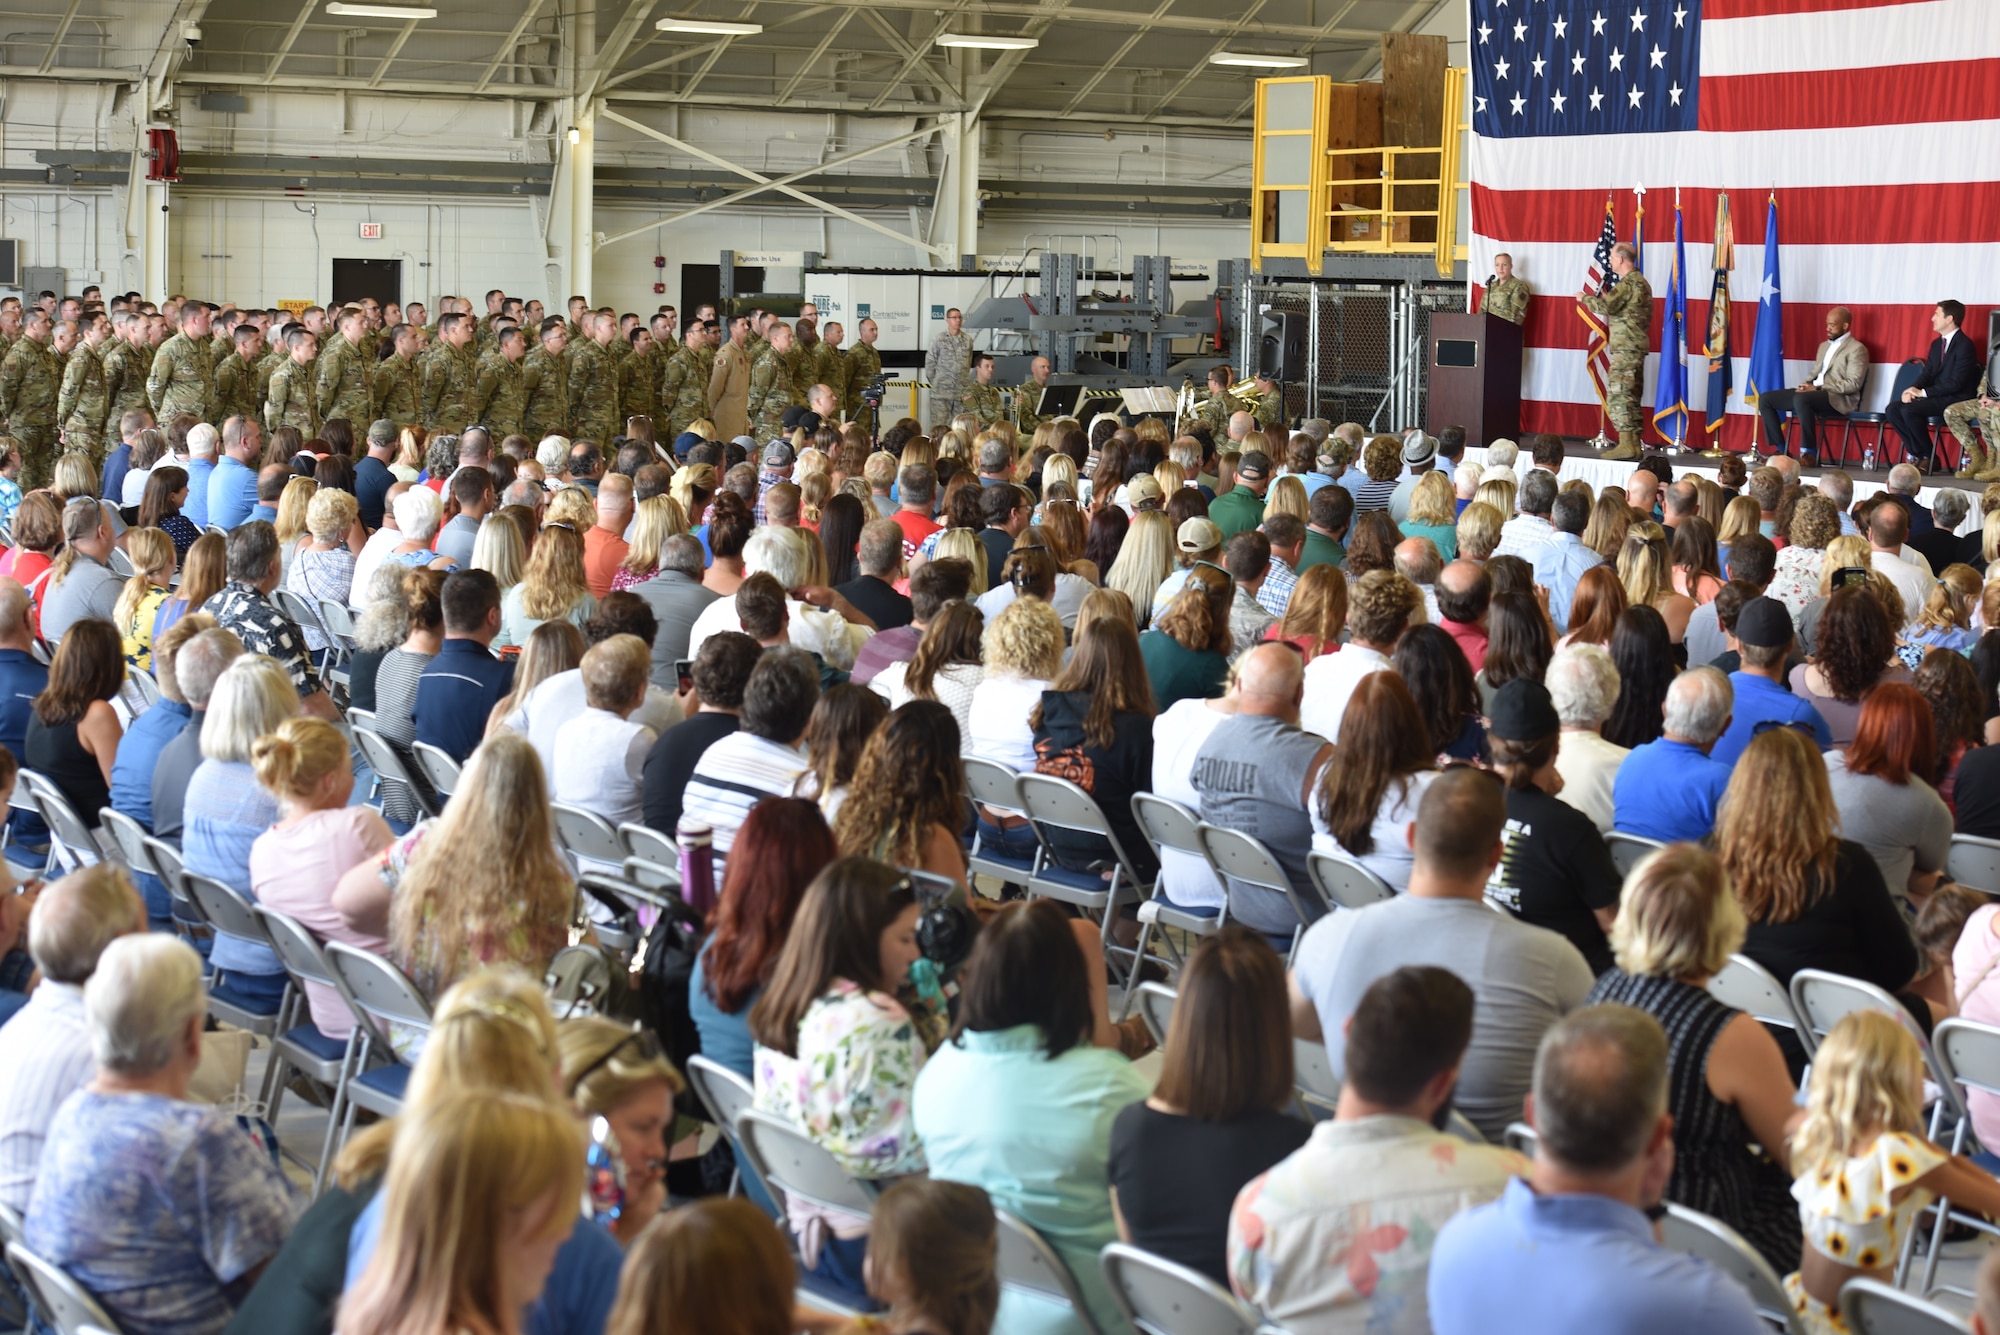 U.S. Air Force Maj. Gen. Donald Dunbar, the adjutant general of Wisconsin, addresses deploying members of the 115th Fighter Wing and their families at a send off ceremony held at Truax Field, Madison, Wis., July 21, 2019.  The 115th Fighter Wing deployed approximately 300 personnel and a number of aircraft to Afghanistan in support of Operation Freedom Sentinel and NATO's Resolute Support. (U.S. Air National Guard photo by Staff Sgt. Kyle Russell)